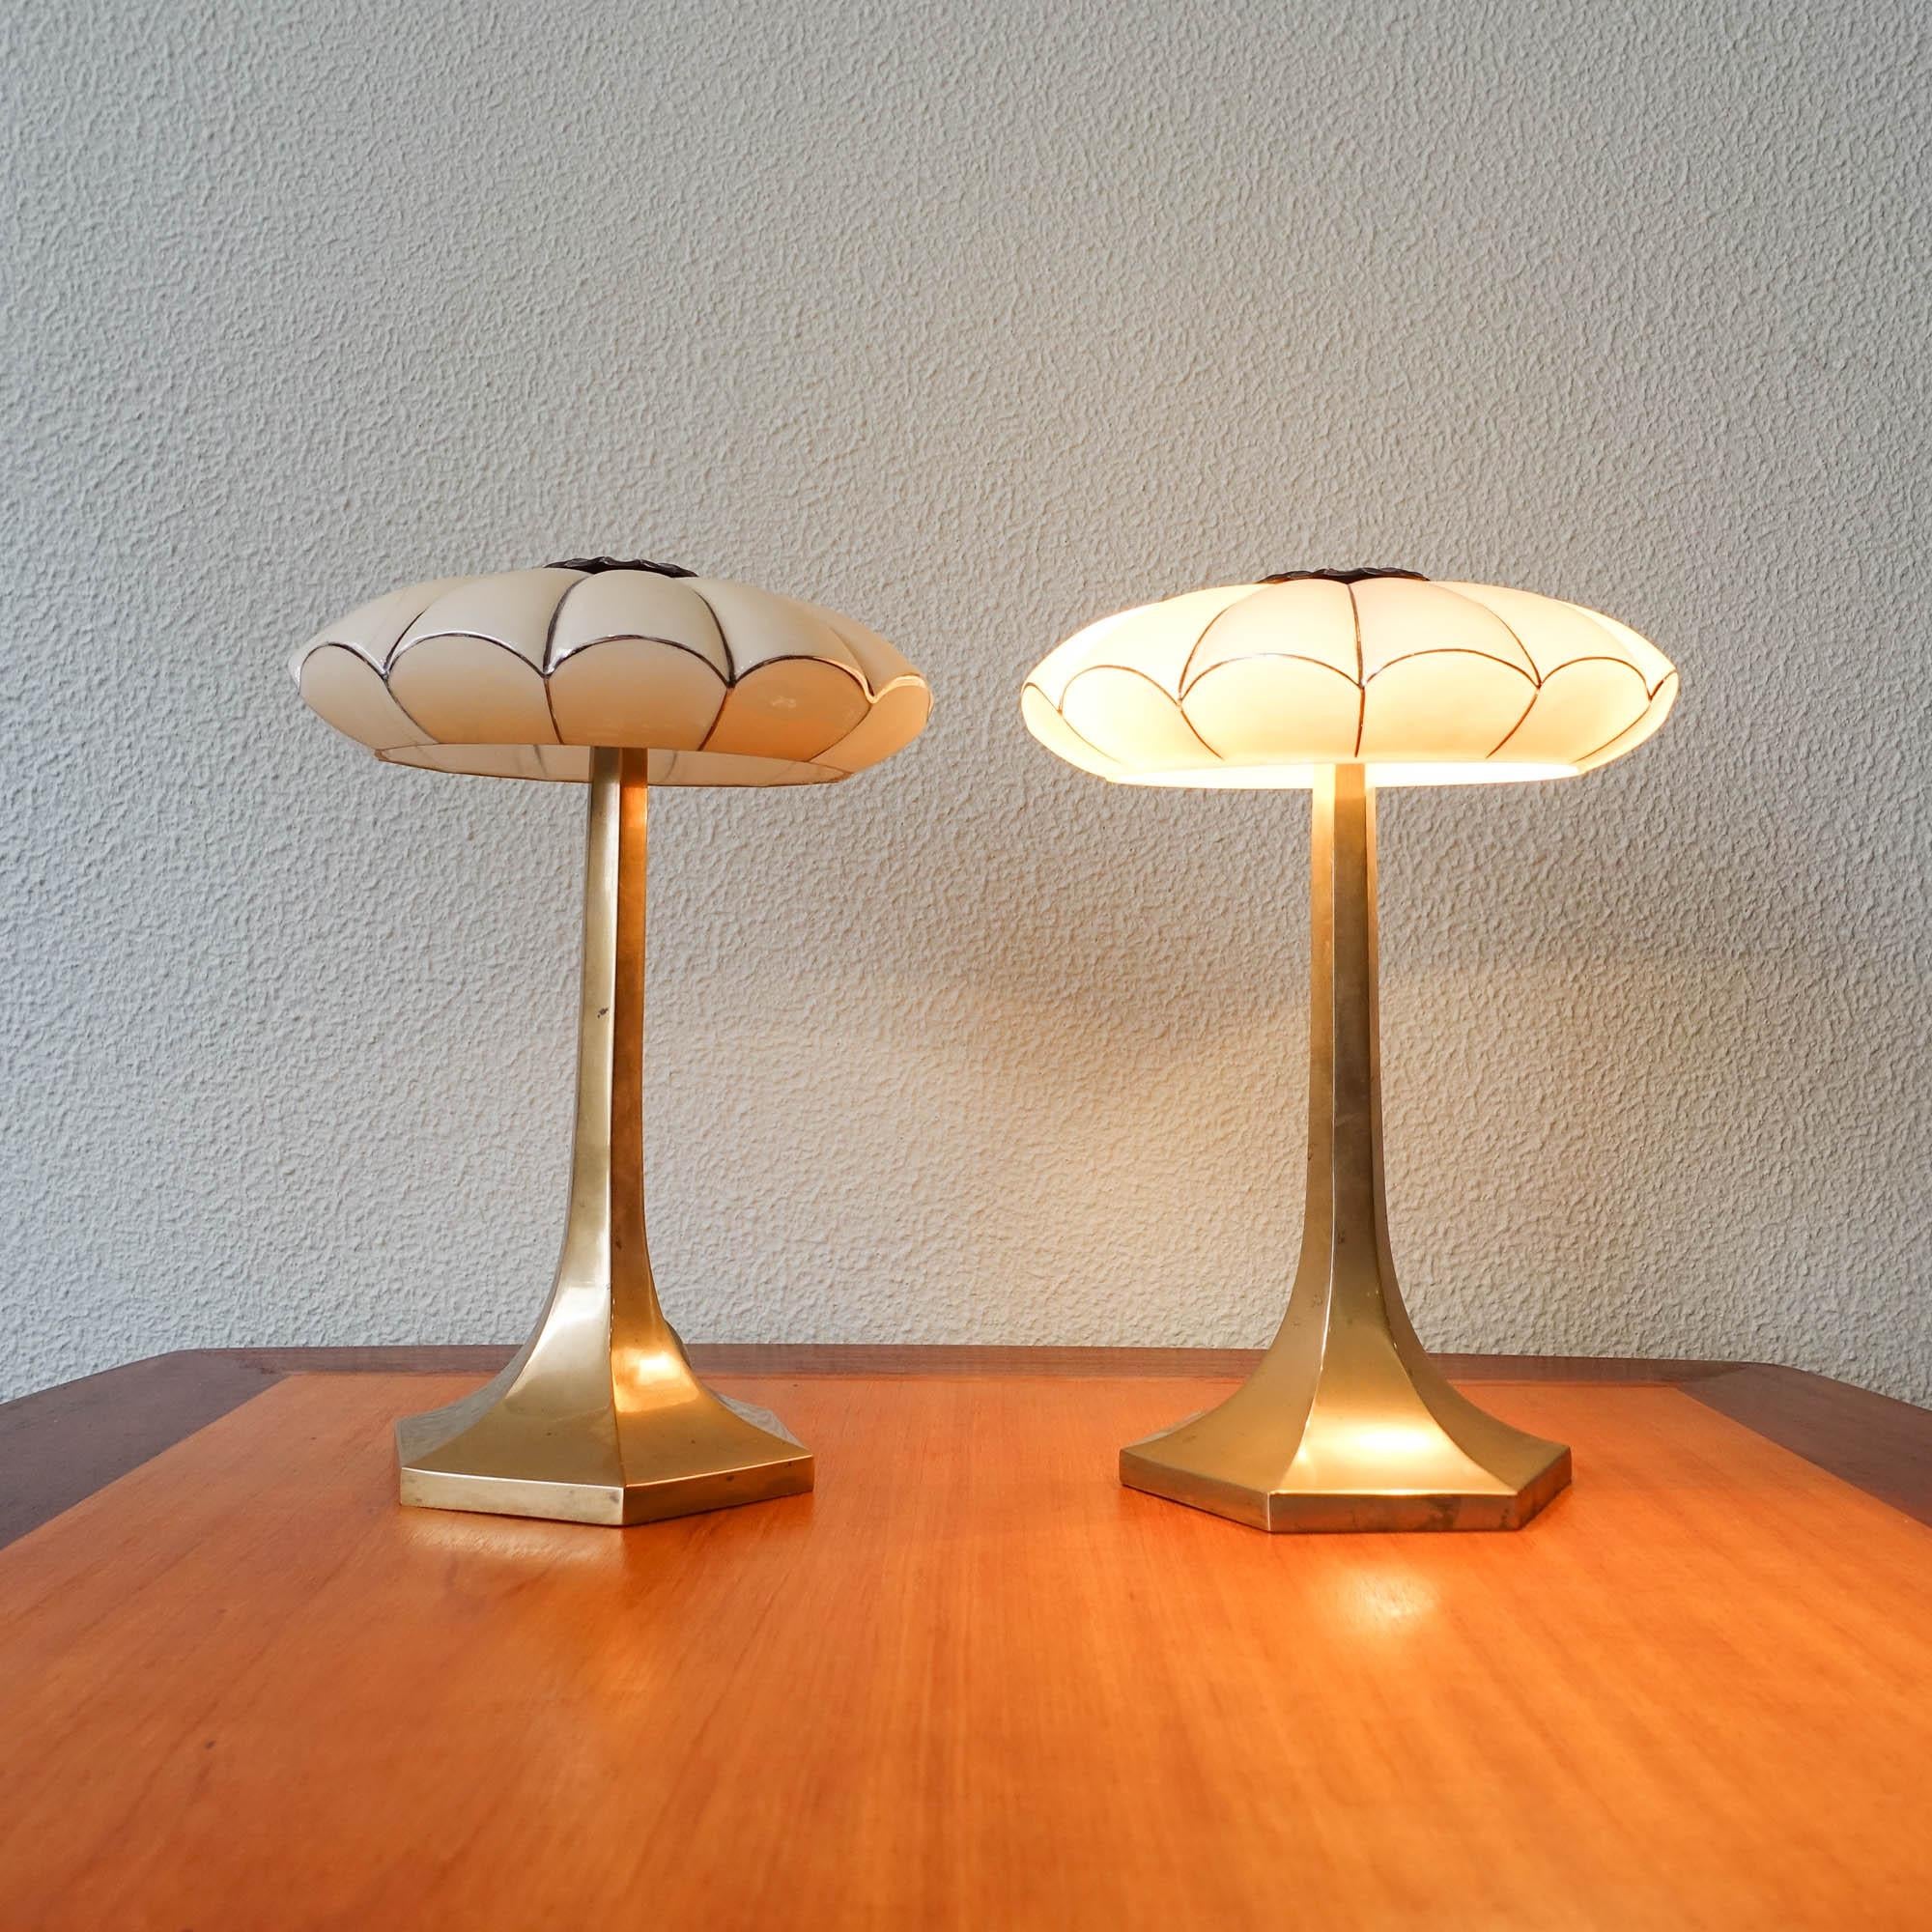 This pair of table lamps were designed by Josef Hoffman and produced by Wiener Werkstatte, in Austria, during the 1930's. Each lamp feature a solid brass hexagonal base were a delicate poly-lobed opaline glass is set. The glass is a light yellow